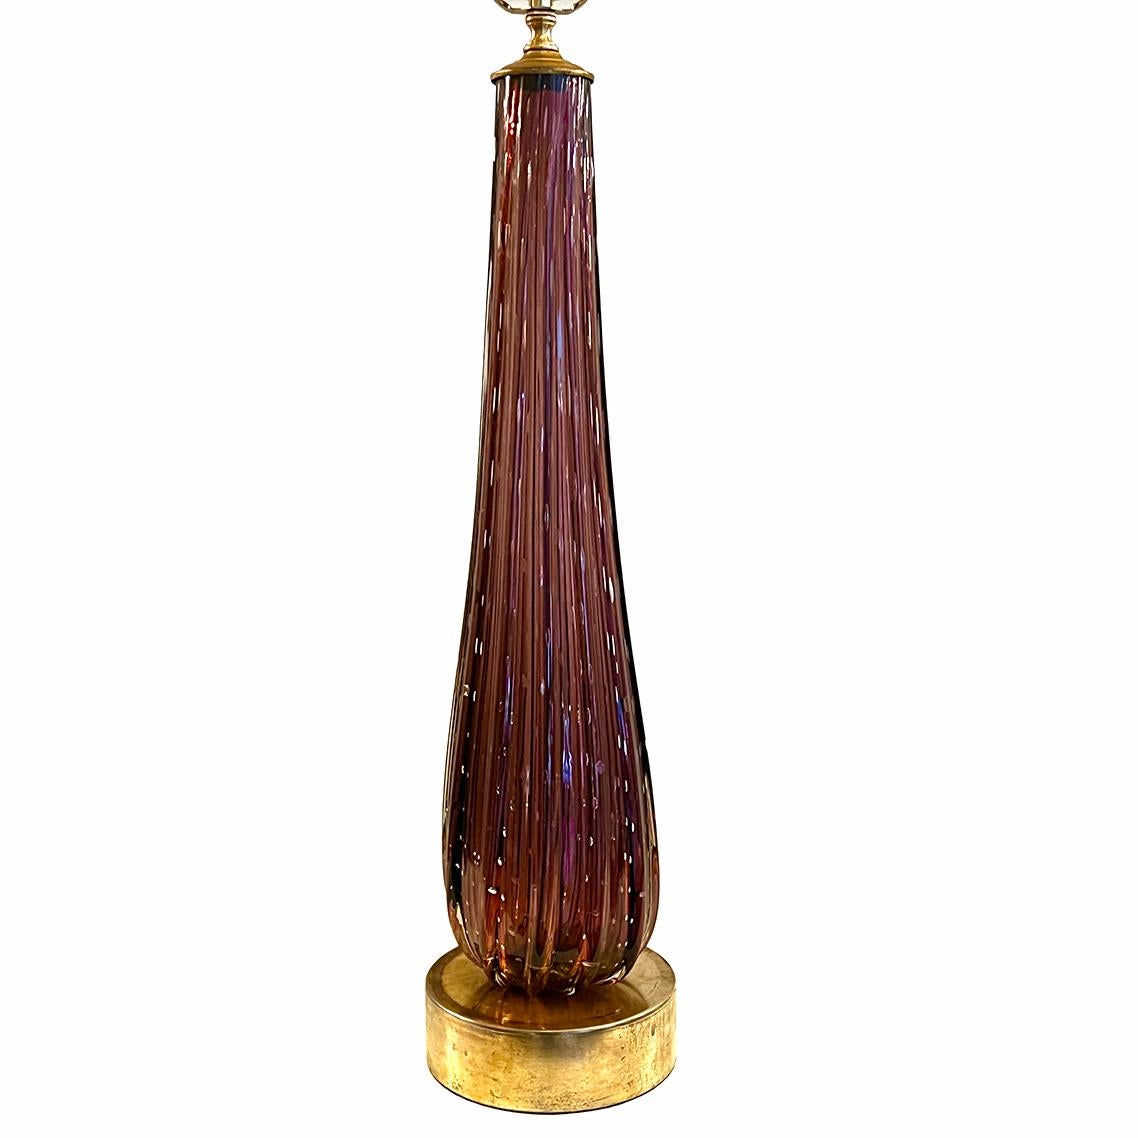 A circa 1960's Italian amethyst Murano glass table lamp.

Measurements:
Height of body: 25